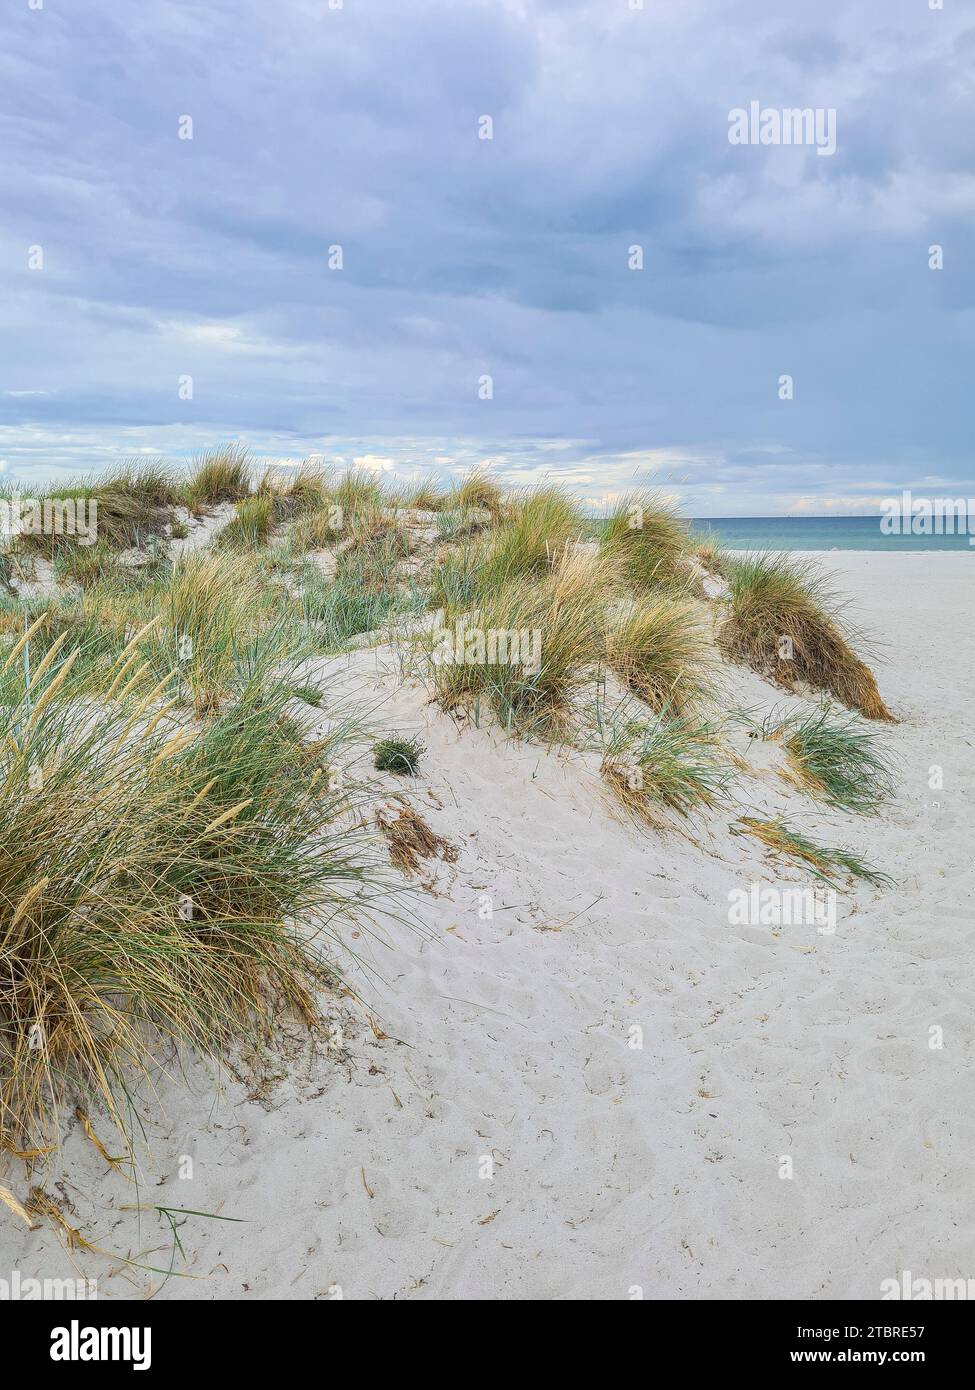 Germany, Mecklenburg-Western Pomerania, peninsula Fischland-Darß-Zingst, fine sandy beach with dune grass at the beach crossing in Prerow Stock Photo